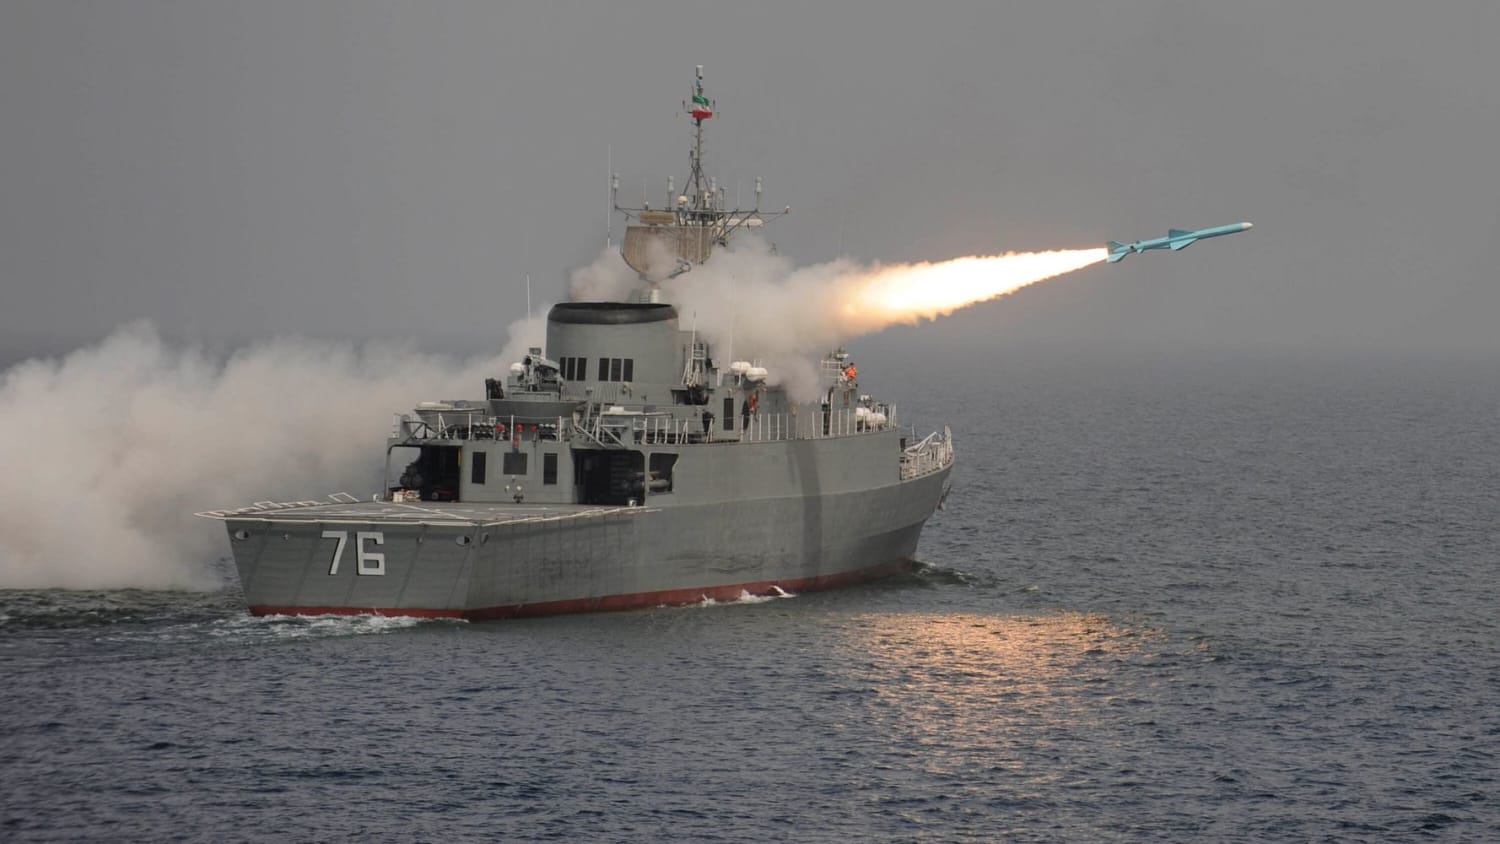 Iranian Warship Hits Another With Missile During Training Accident, Killing 19 Sailors